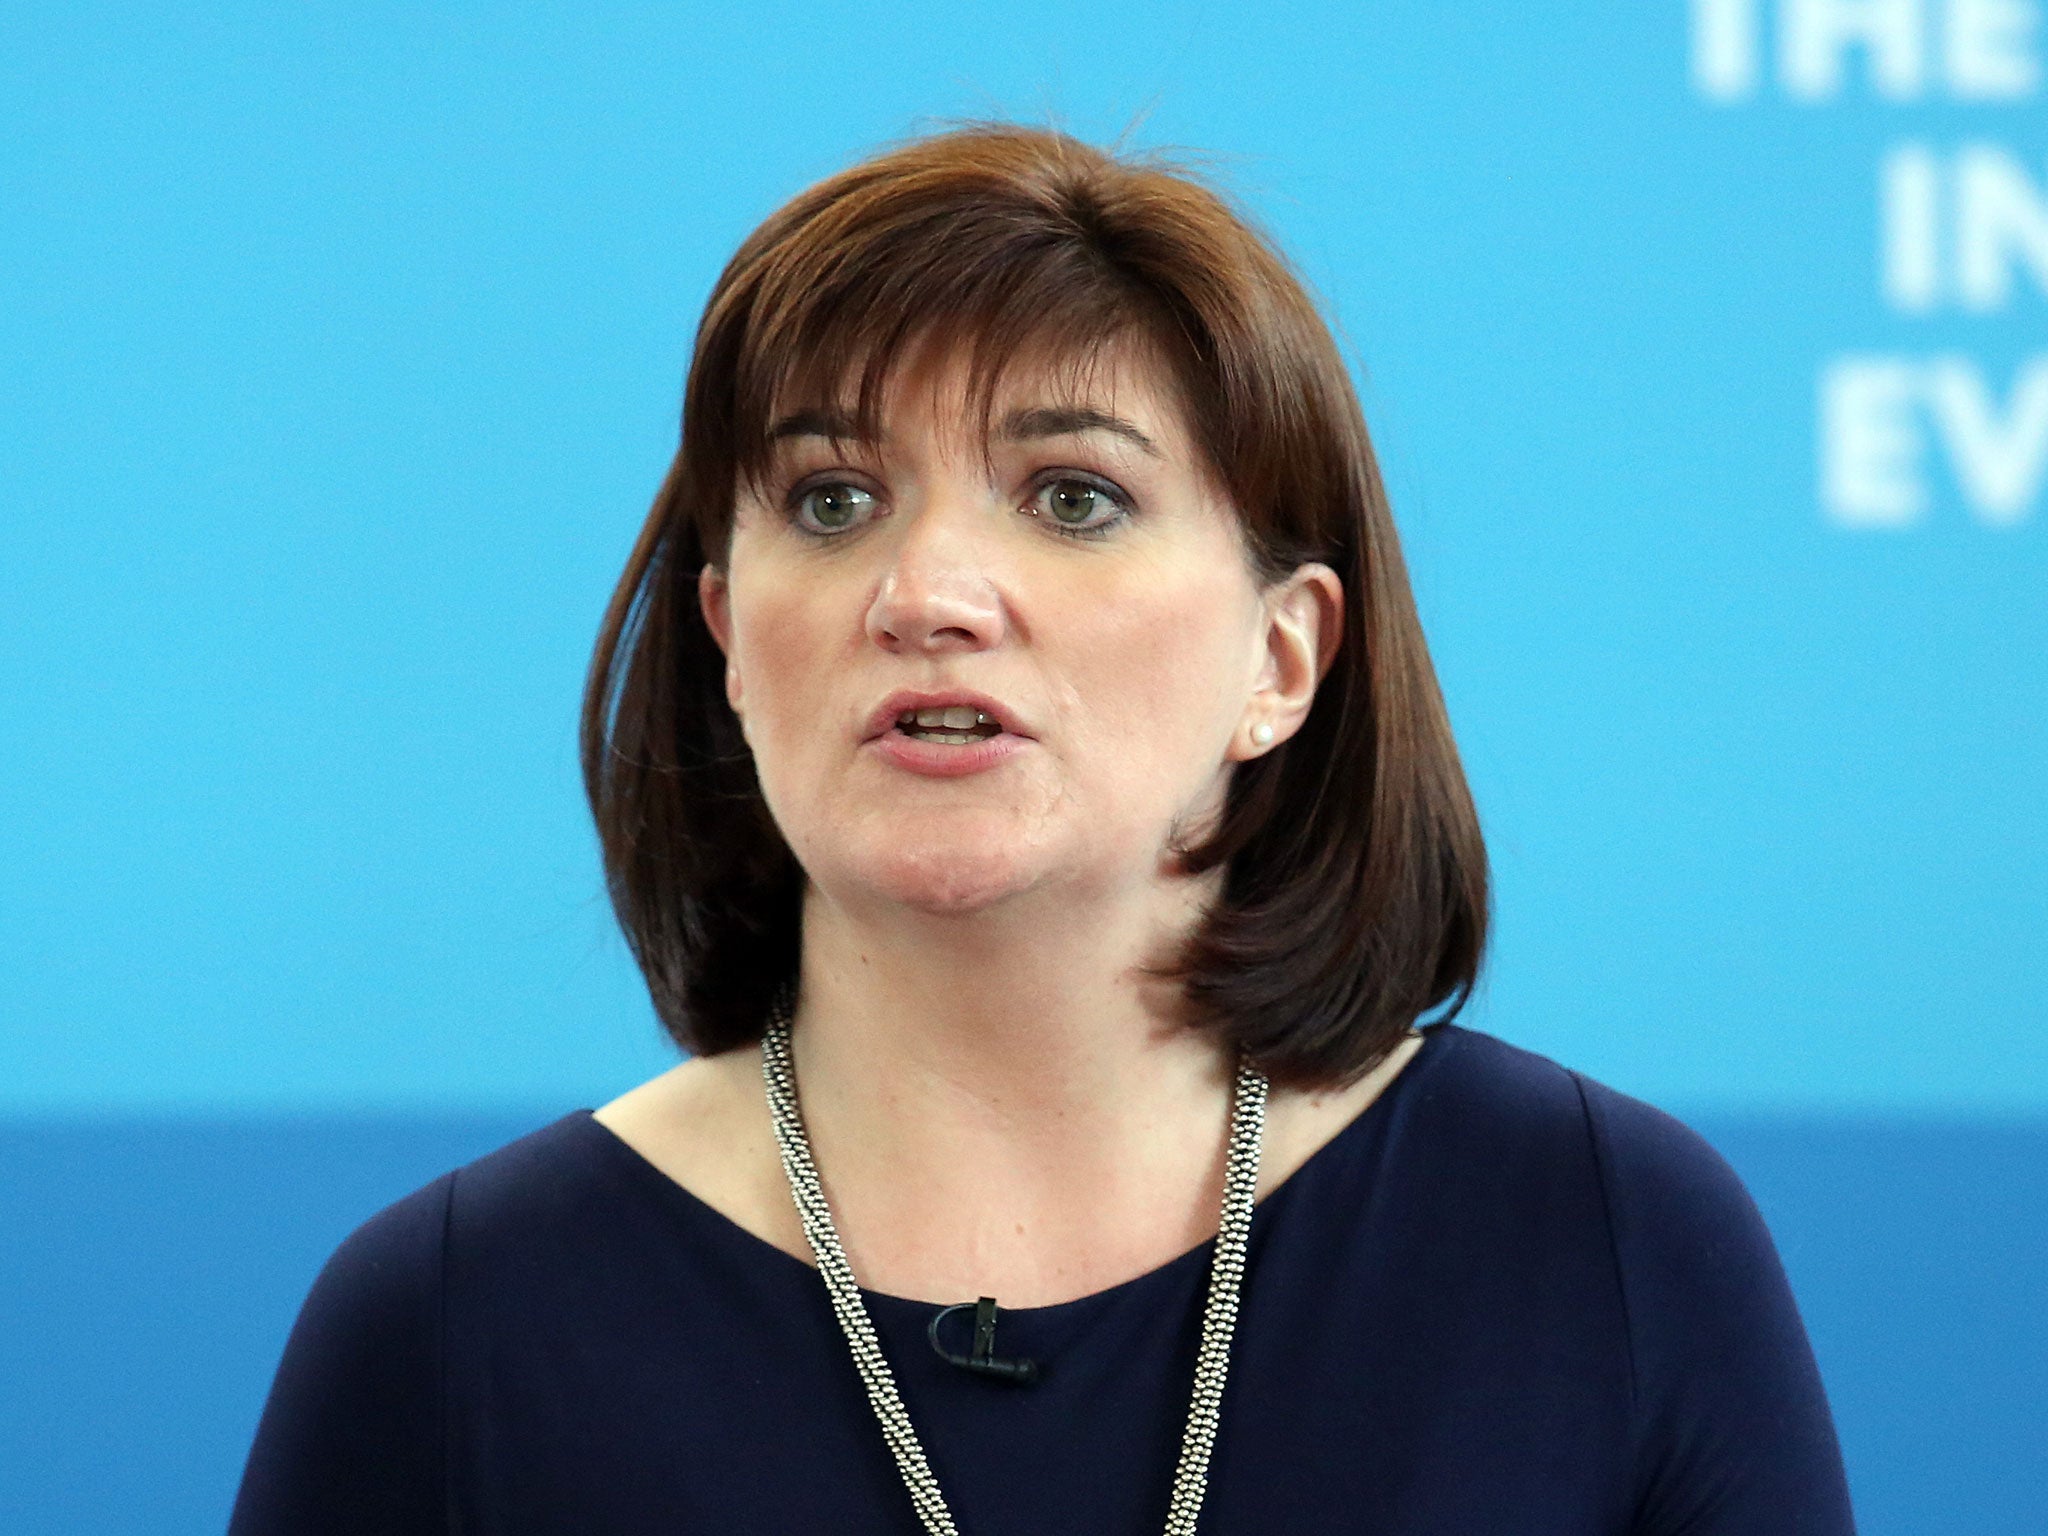 Education Secretary Nicky Morgan has acknowledged schools need to move away from the "exam factory" model and concentrate more on character building and communication skills.